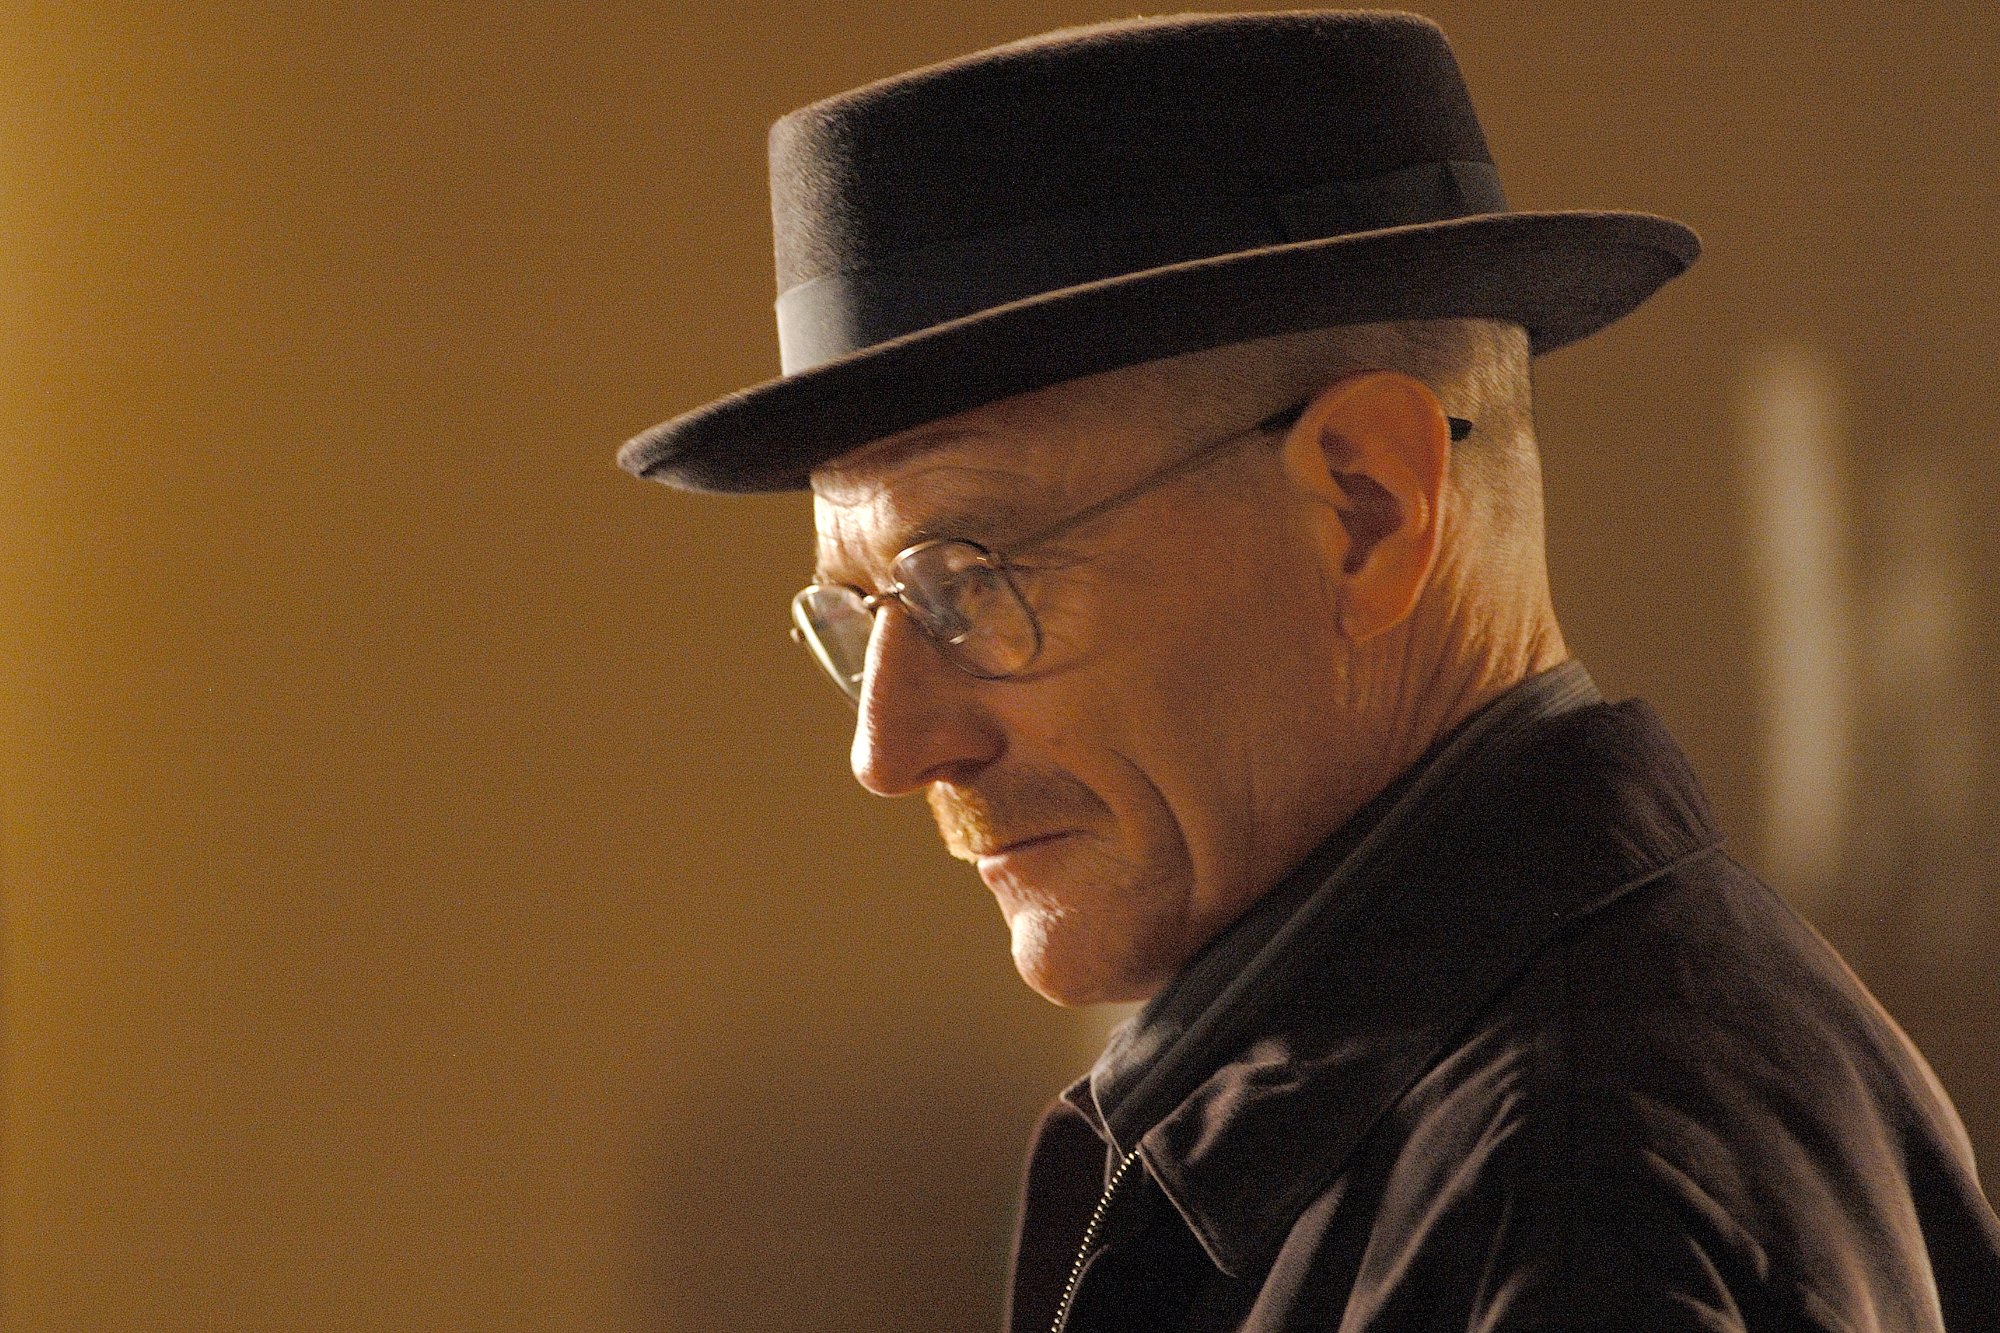 Bryan Cranston as Walter White/Heisenberg in 'Breaking Bad' Season 2. The image shows his side profile, and he's wearing his black pork pie hat.